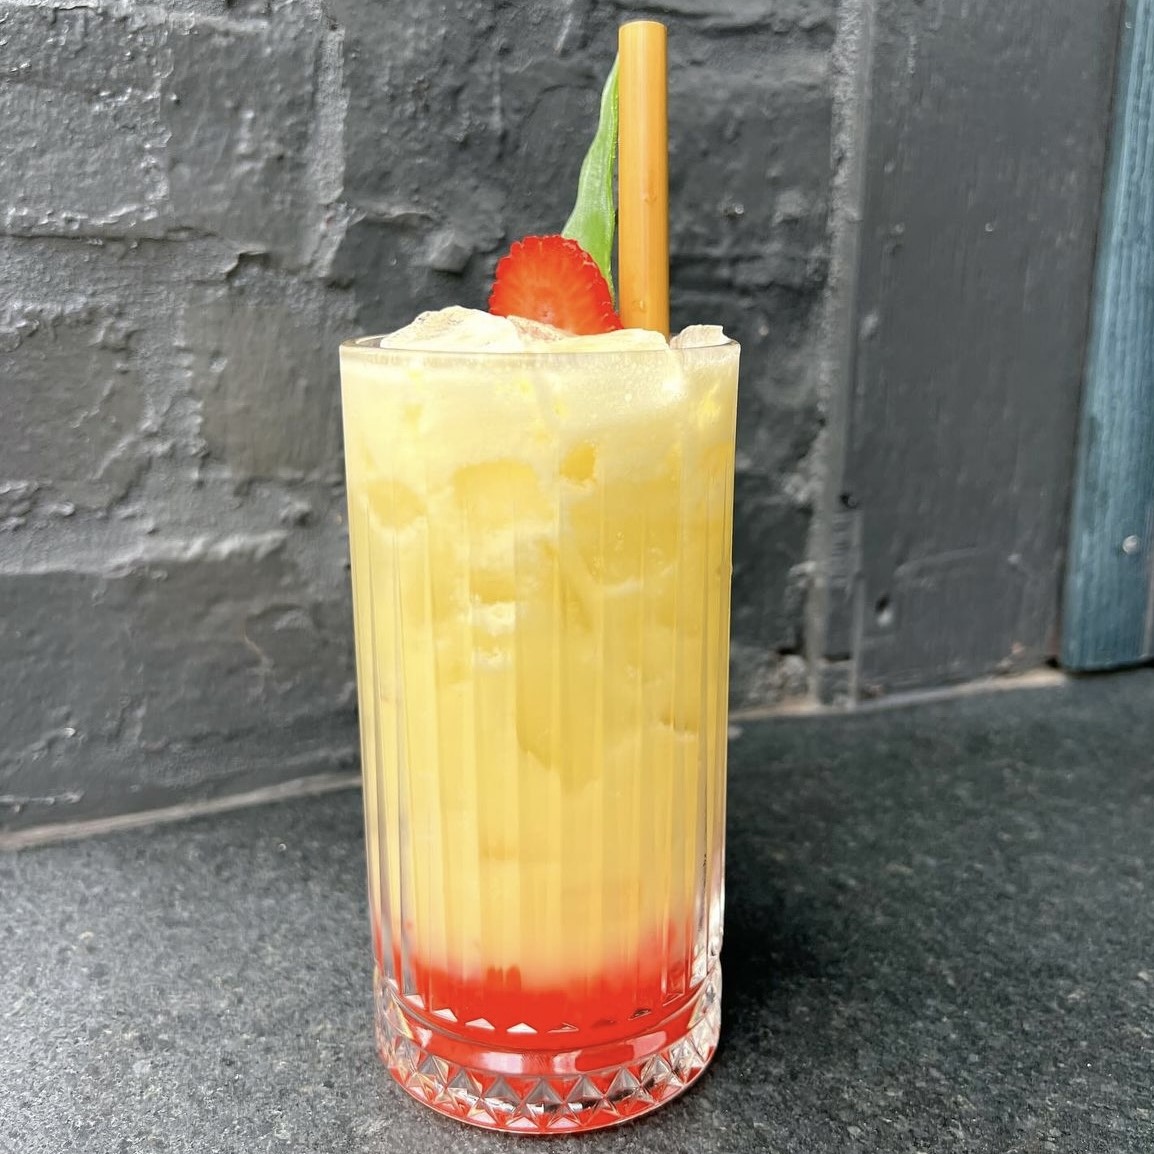 A photo of the Parlor Smoothie Club drink with a strawberry slice on top and a straw.